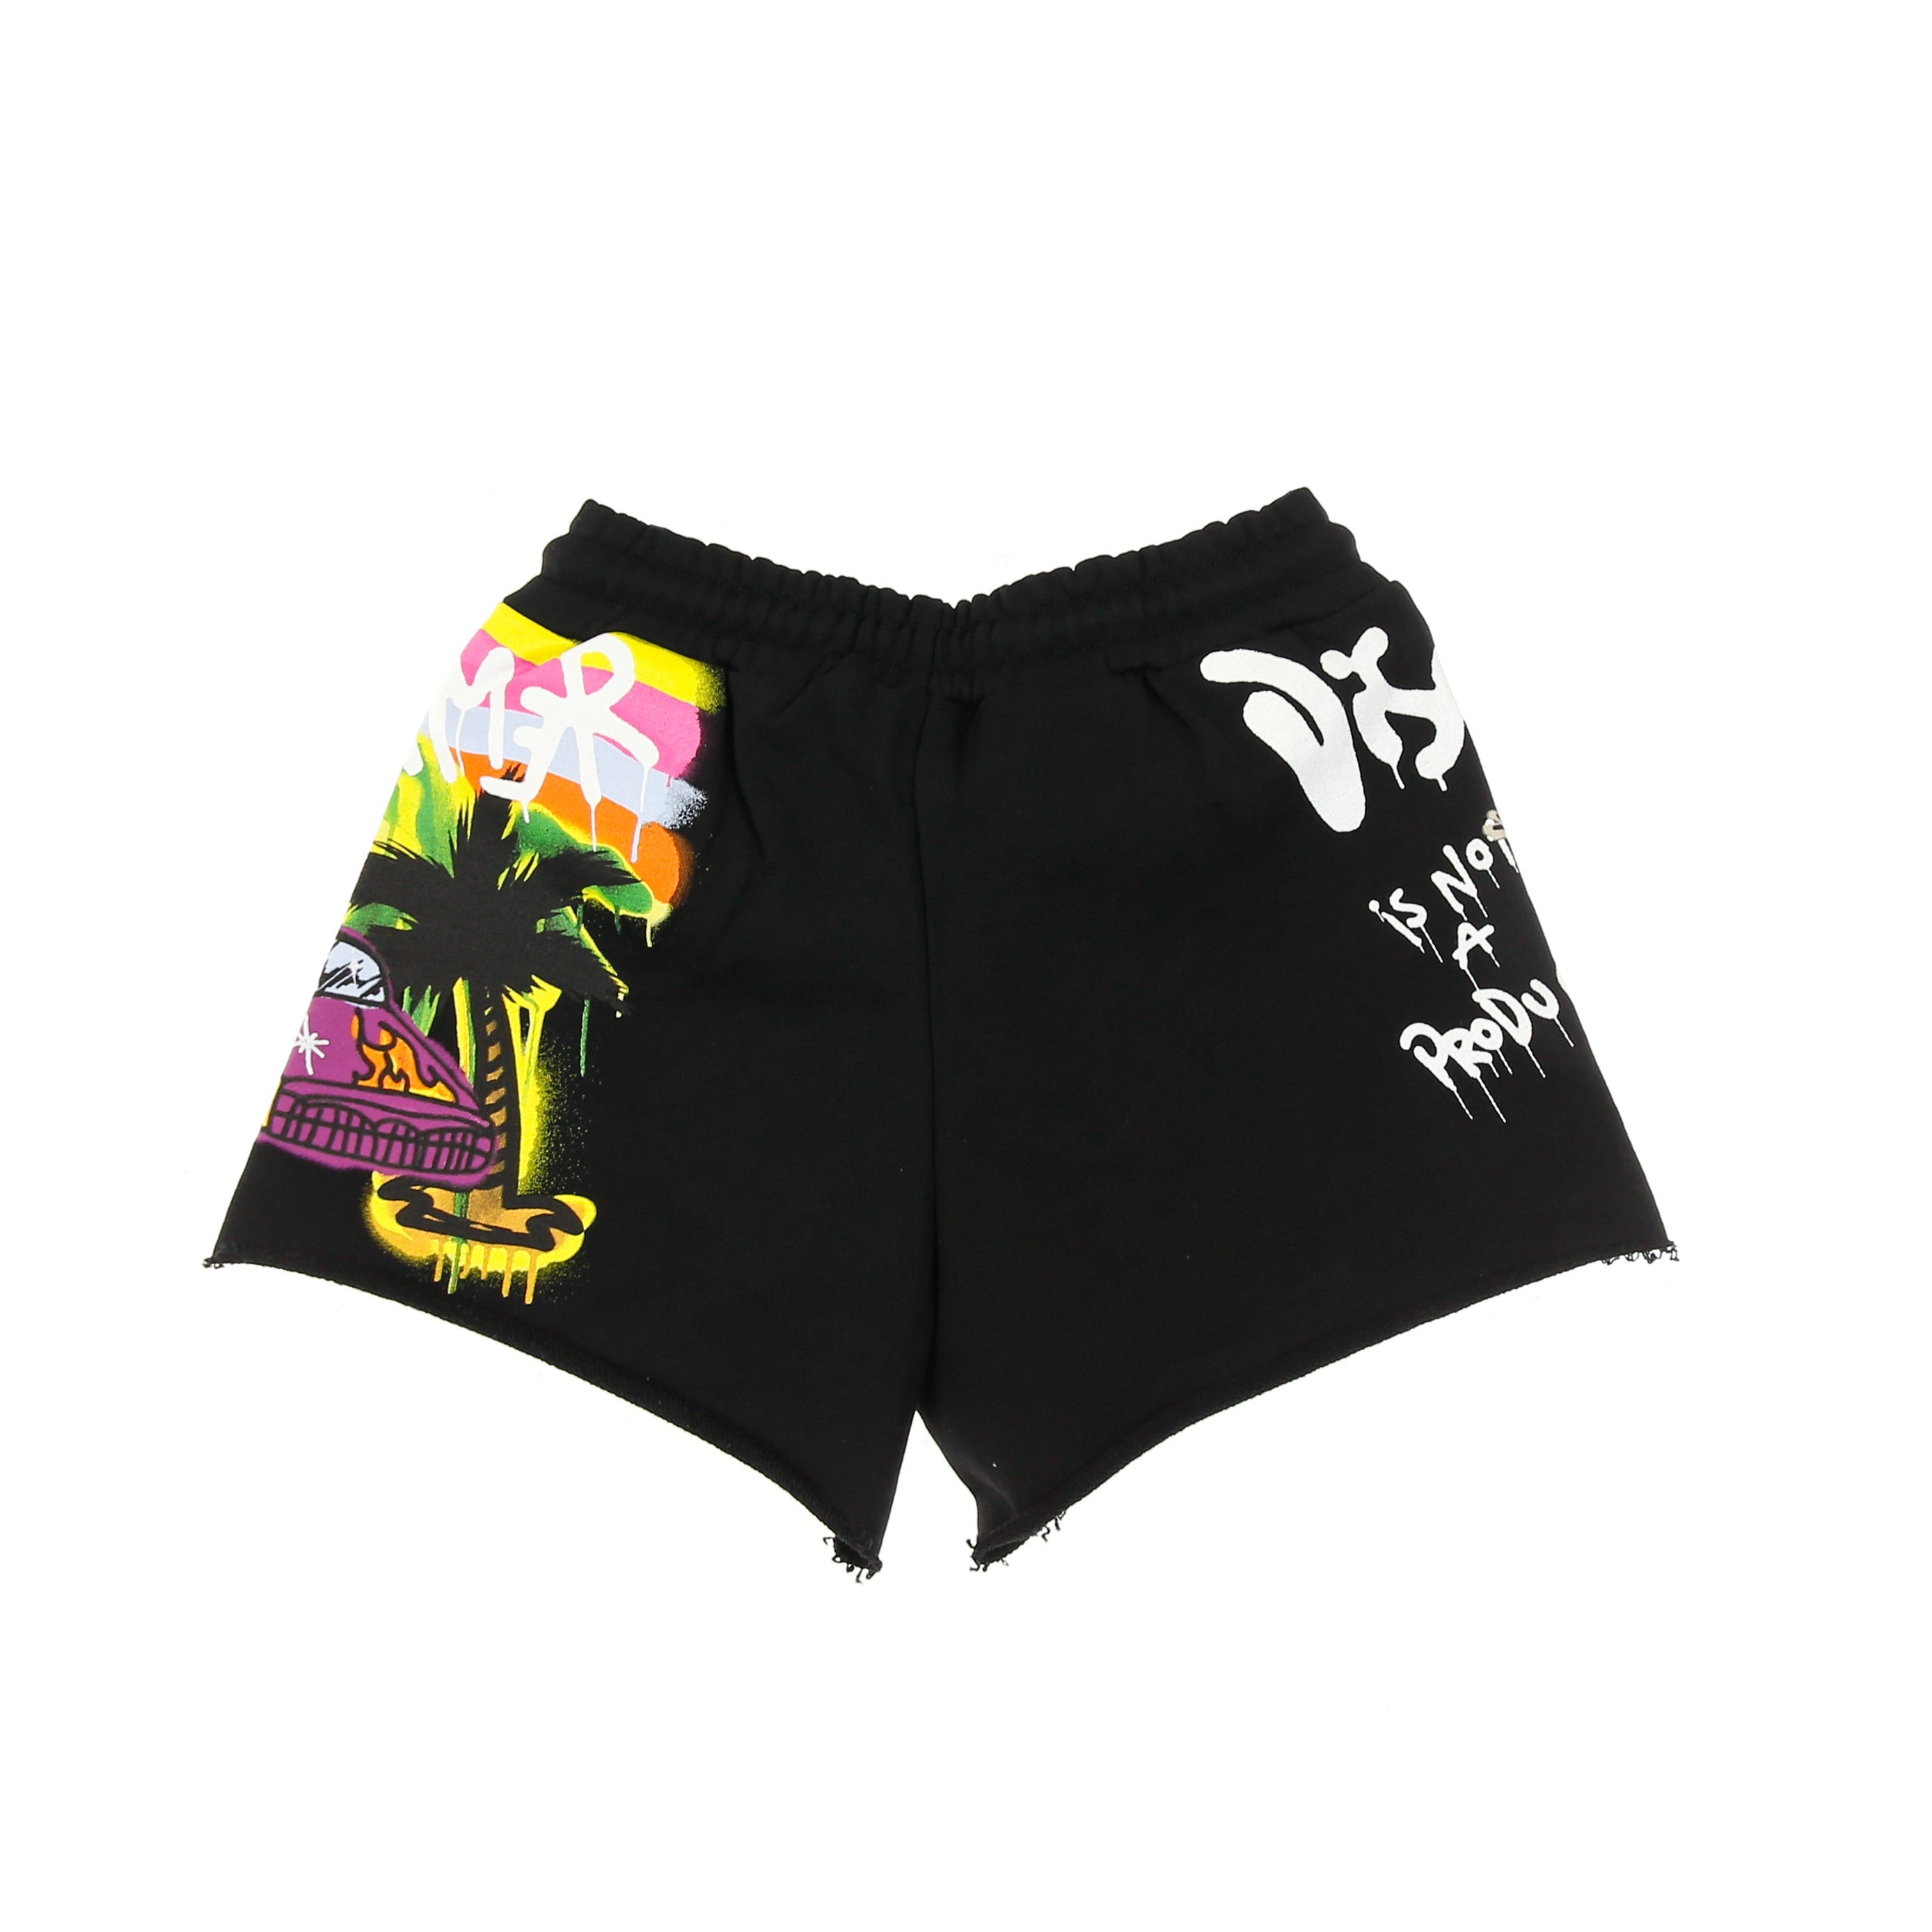 I Can't Forget Shorts Women's Shorts